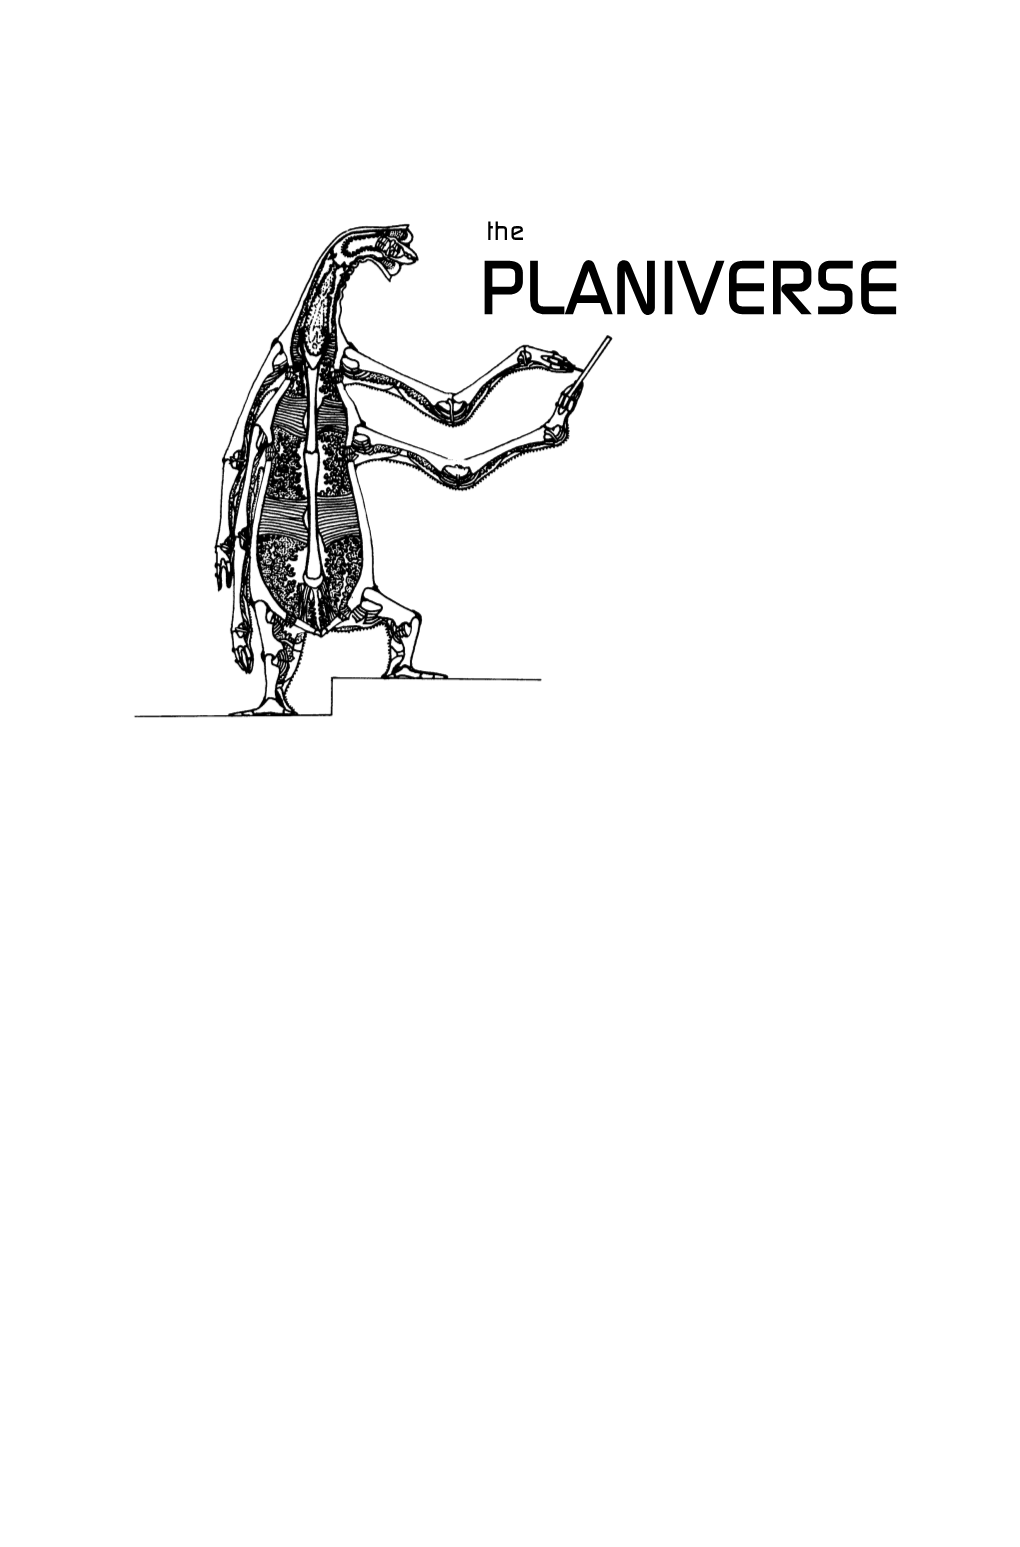 PLANIVERSE the PLANIVERSE Computer Contact with a Two-Dimensional World